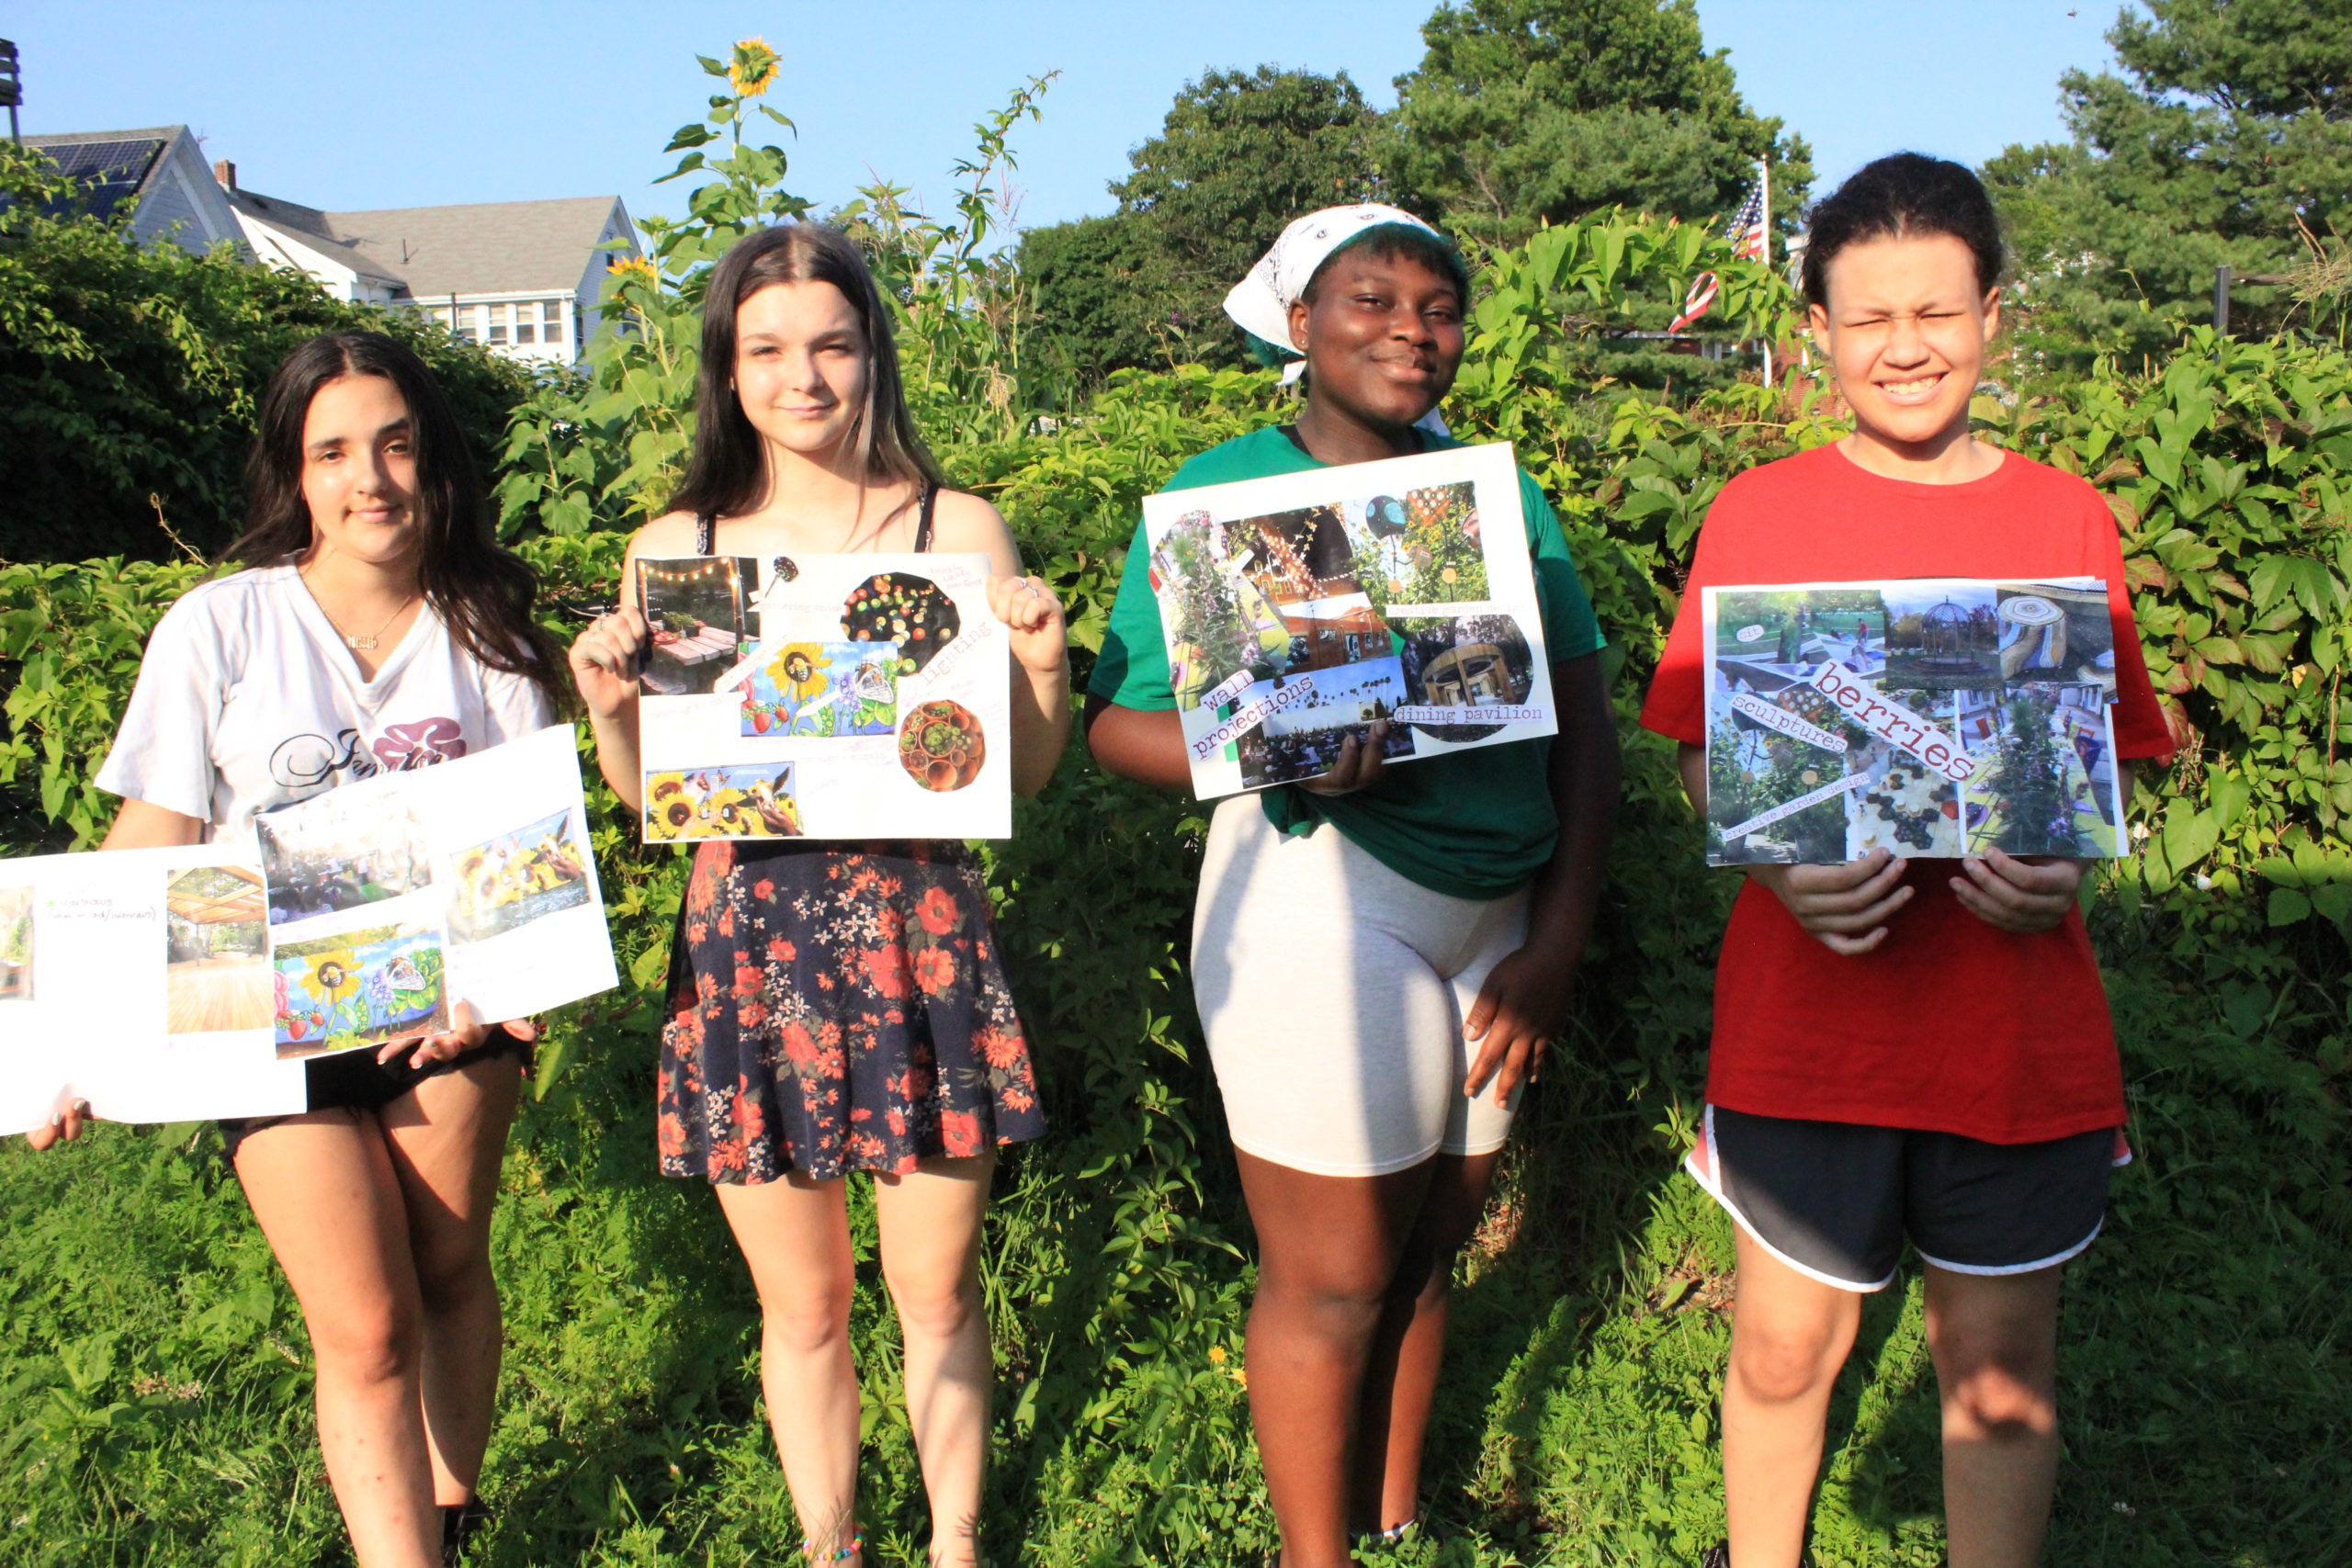 Young people create art that depicts how they visualize agriCulture, the new community gathering spot that will be completed this fall at Willowood Gardens in Gloucester.